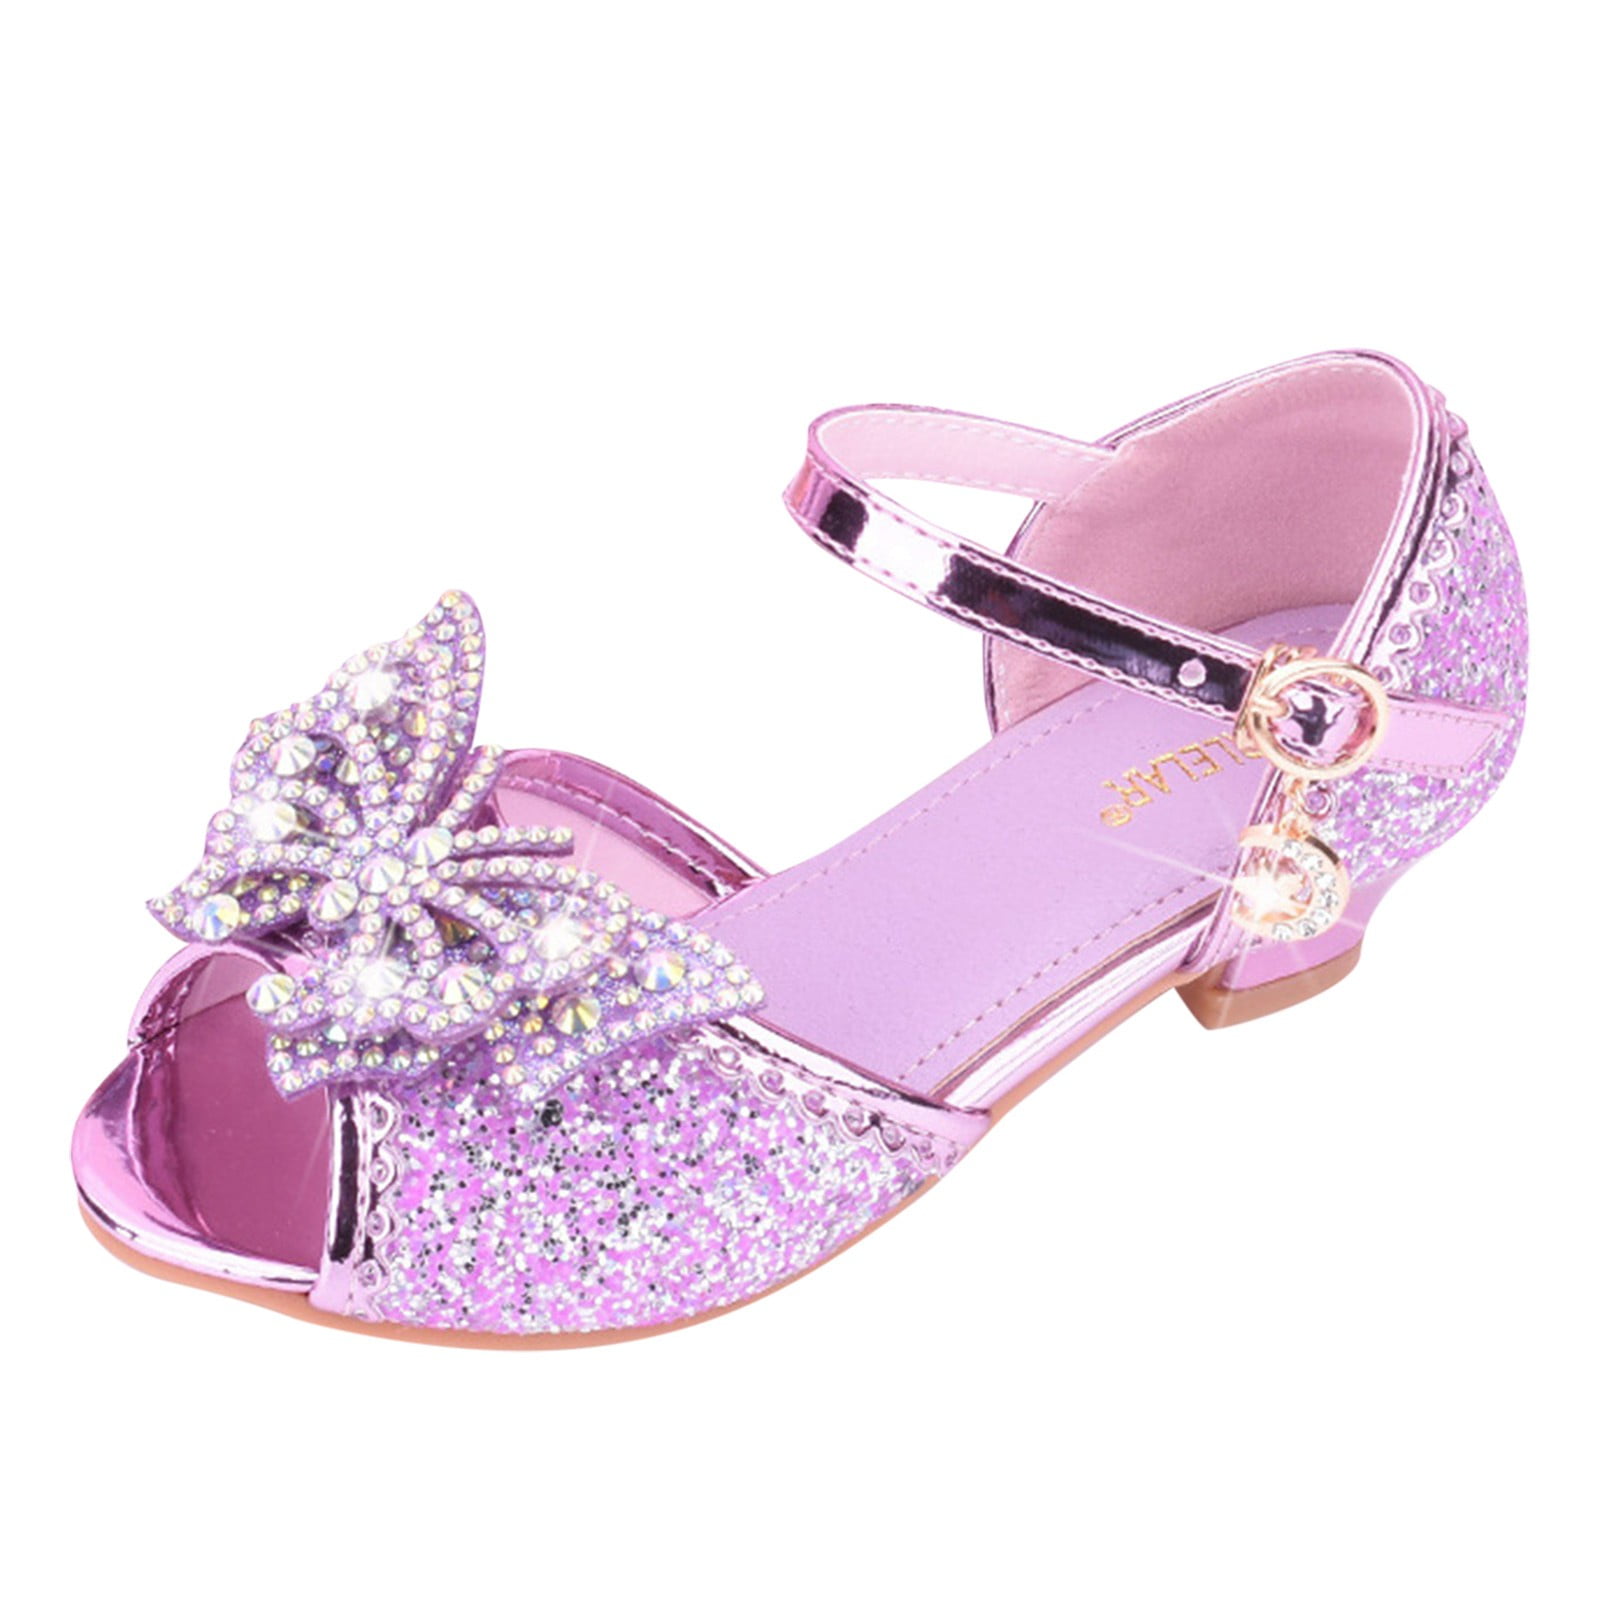 B91xZ Toddler Girl Sandals Children Shoes with Diamond Shiny Sandals ...